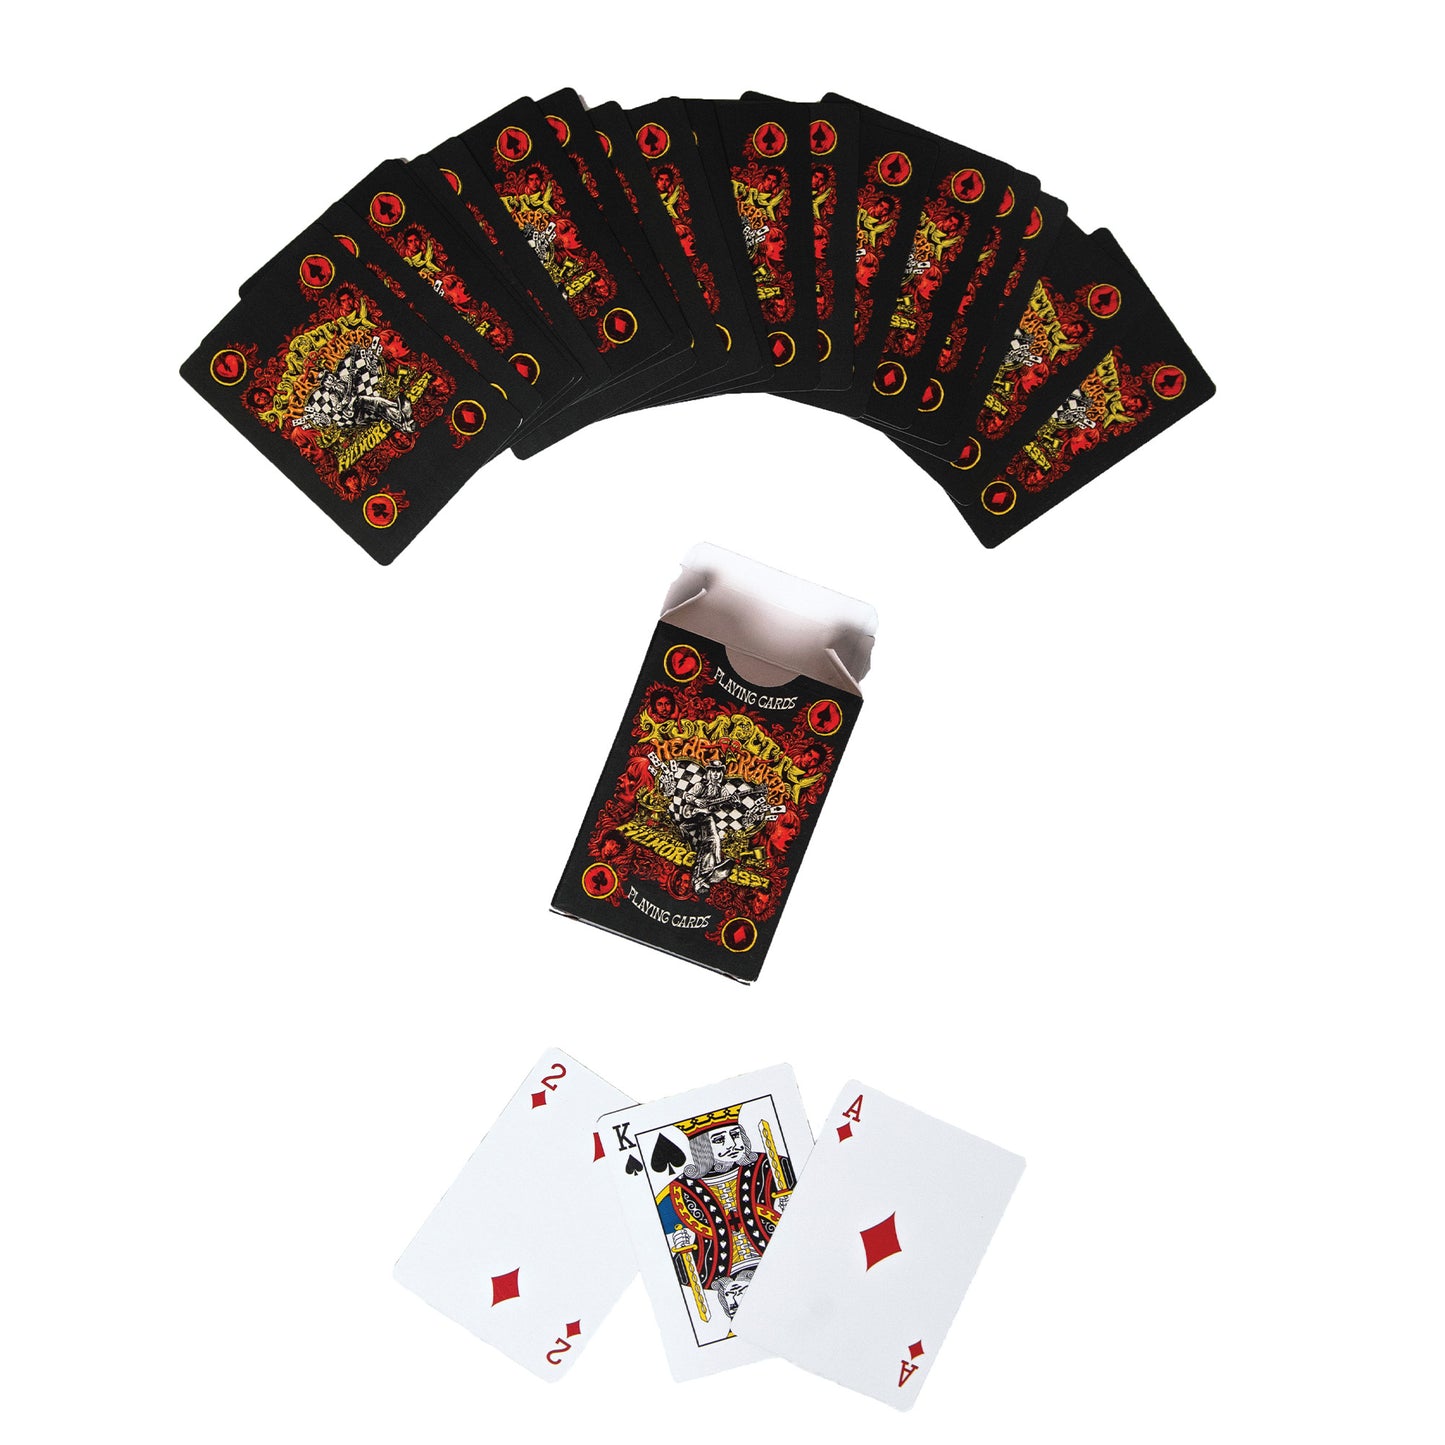 Fillmore 1997 Playing Card Deck